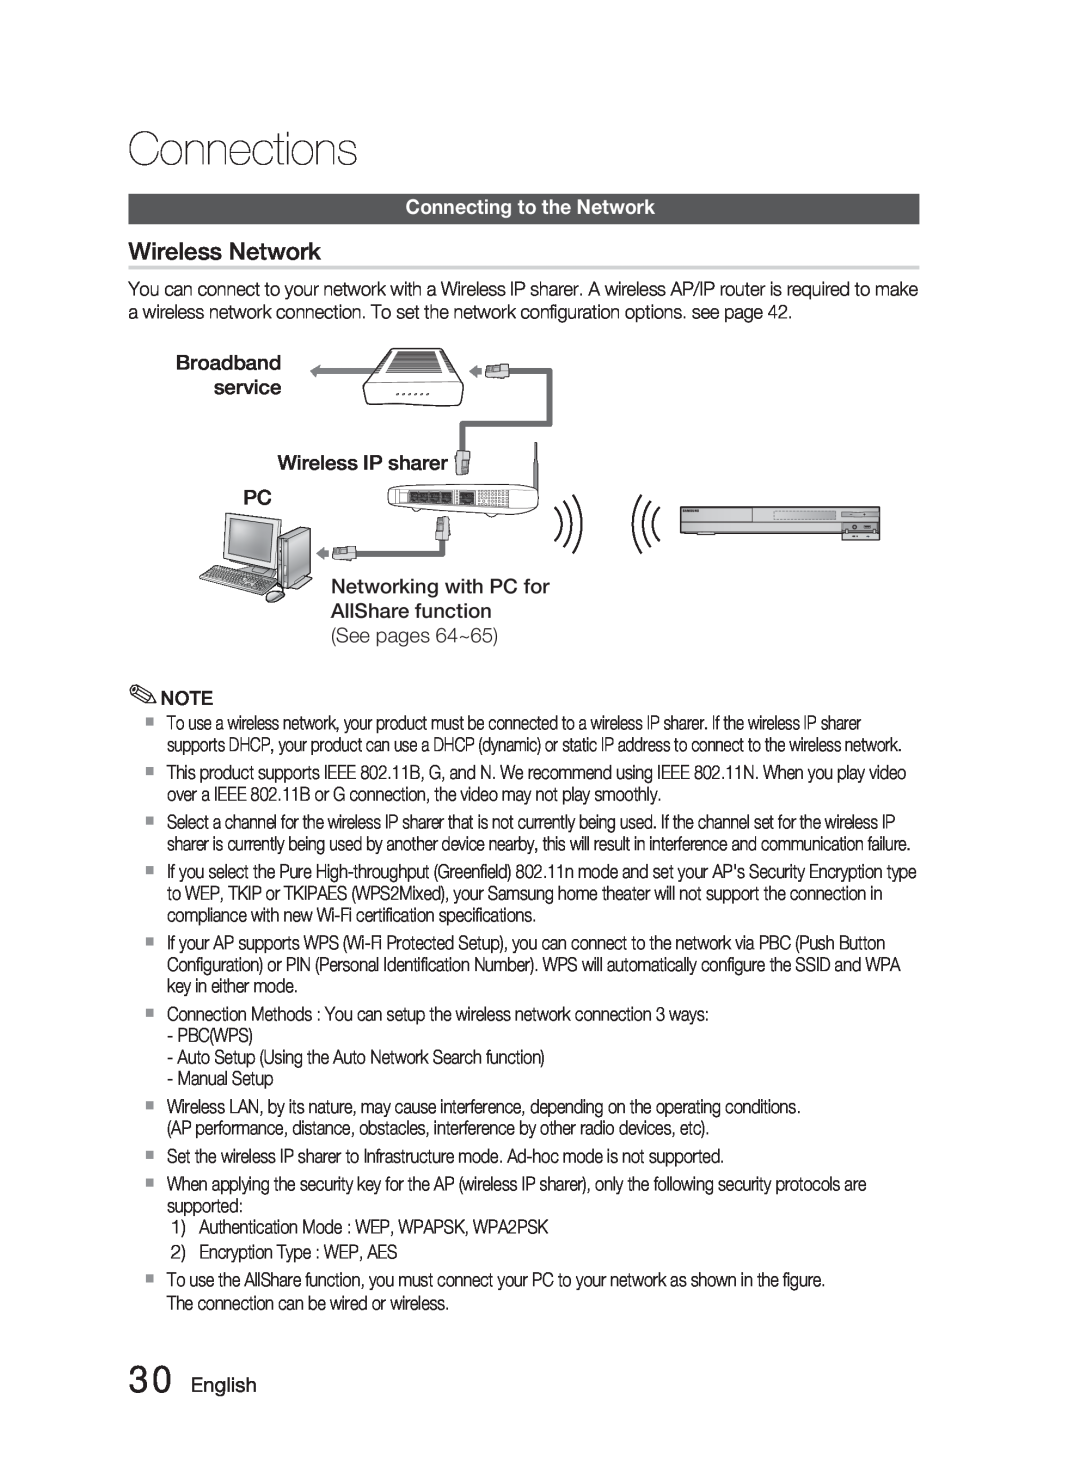 Samsung AH68-02279Y user manual Wireless Network, Broadband service Wireless IP sharer PC, English, Connections 